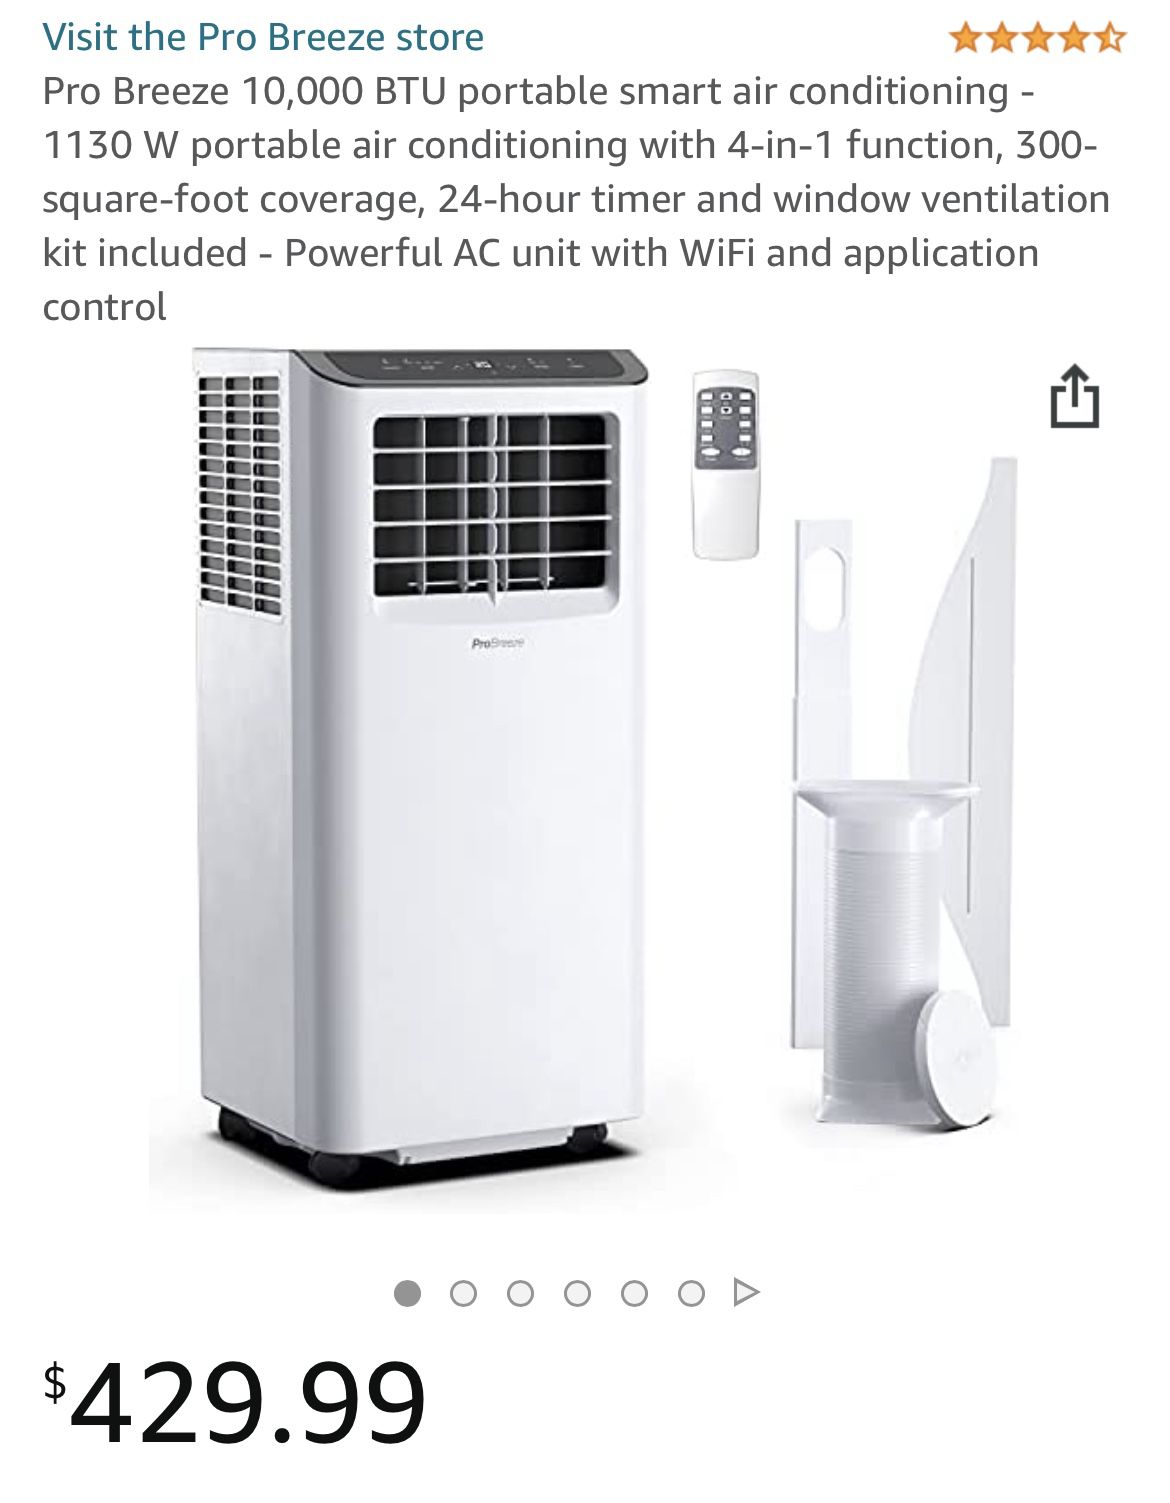 *NEW* Pro Breeze Smart Air Conditioner Portable 10,000 BTU - 1130W Portable Air Conditioner with 4-in-1 Function, 300 Sq Ft Coverage, 24 Hour Timer & 